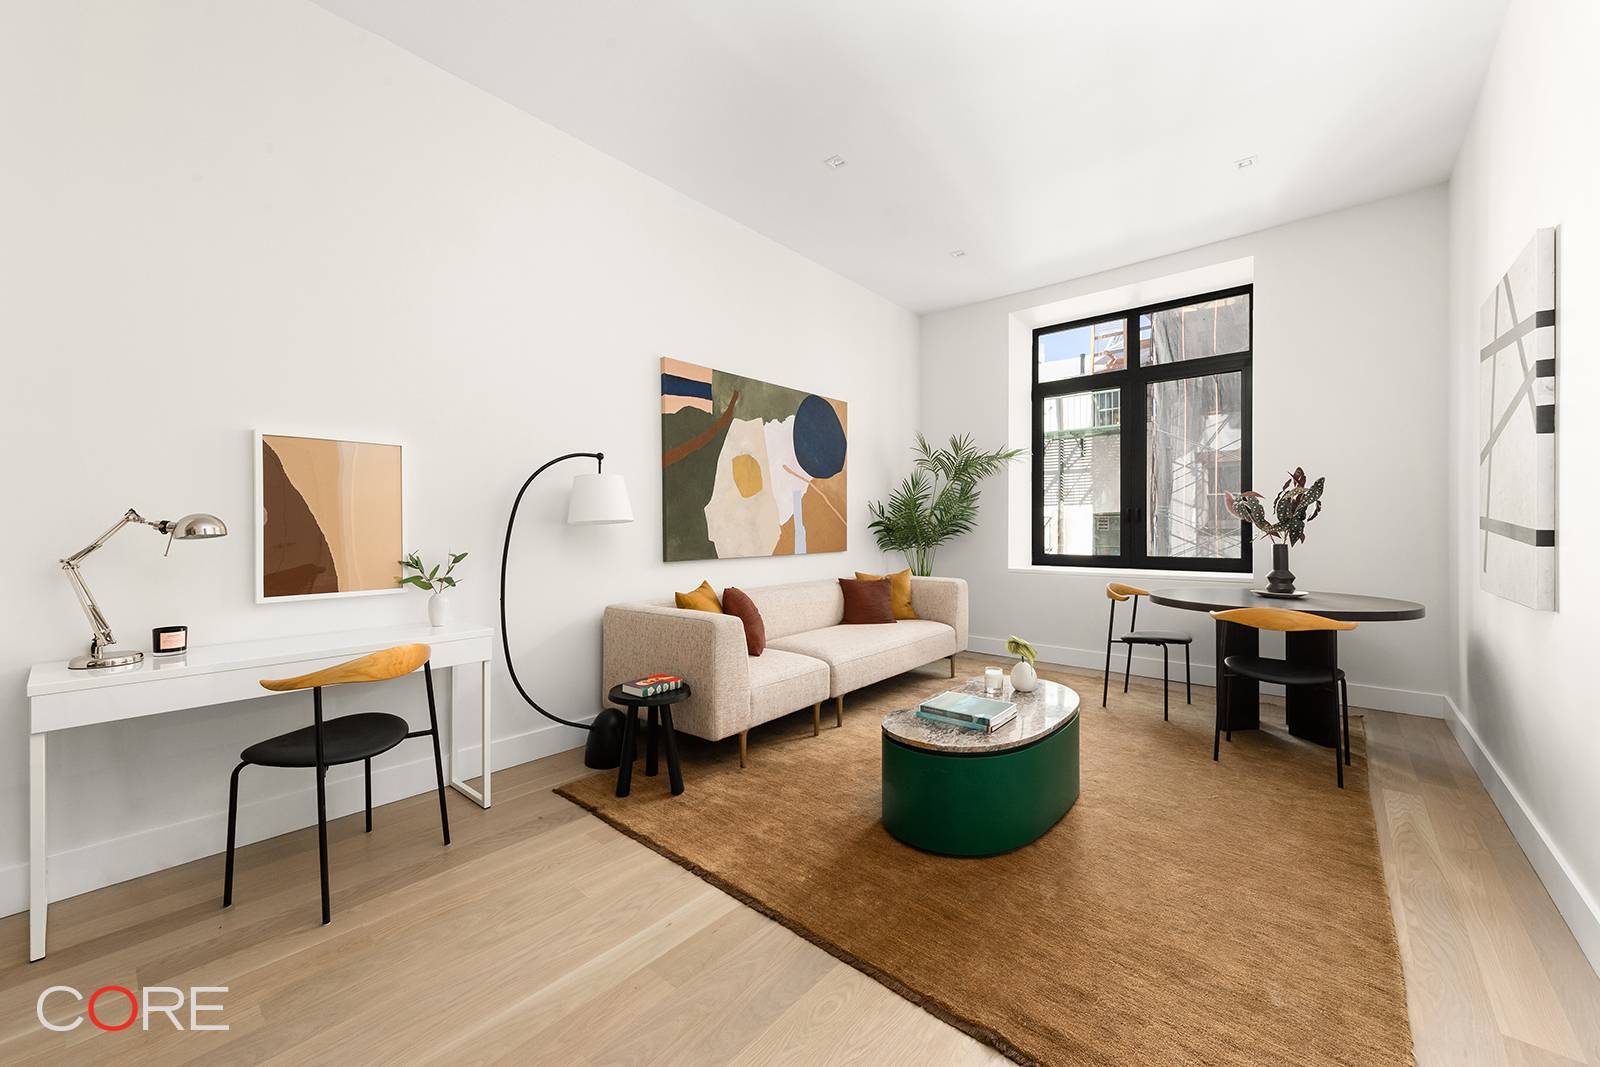 Welcome to 435 West 19th Street, Manhattan's newest boutique development nestled in the heart of Chelsea's historic district, where landmark brownstones meet modern luxury.